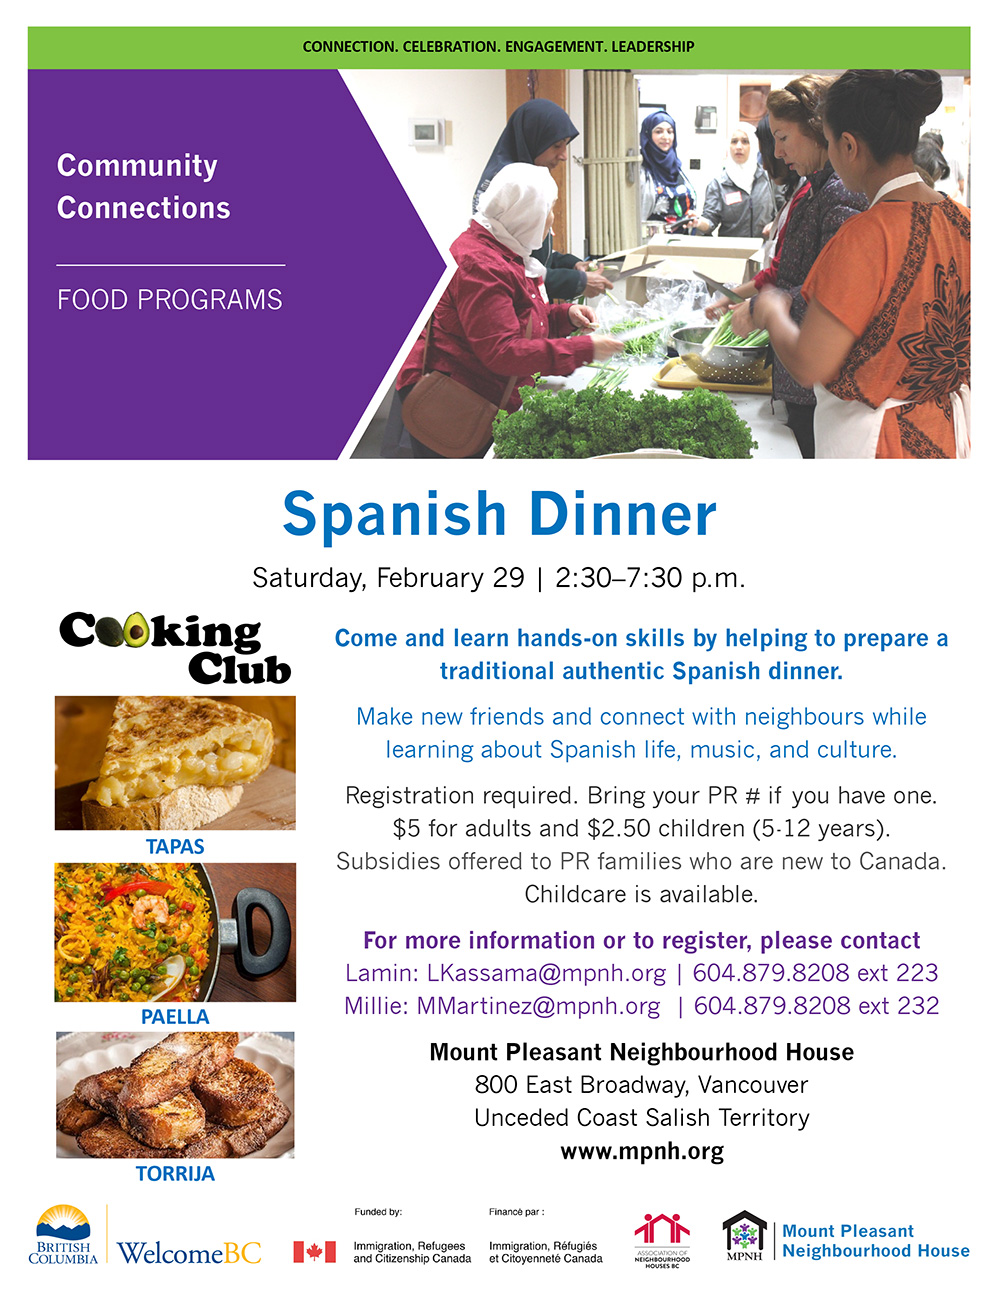 Poster for the Spanish dinner showing people cooking together and lots of Spanish dishes